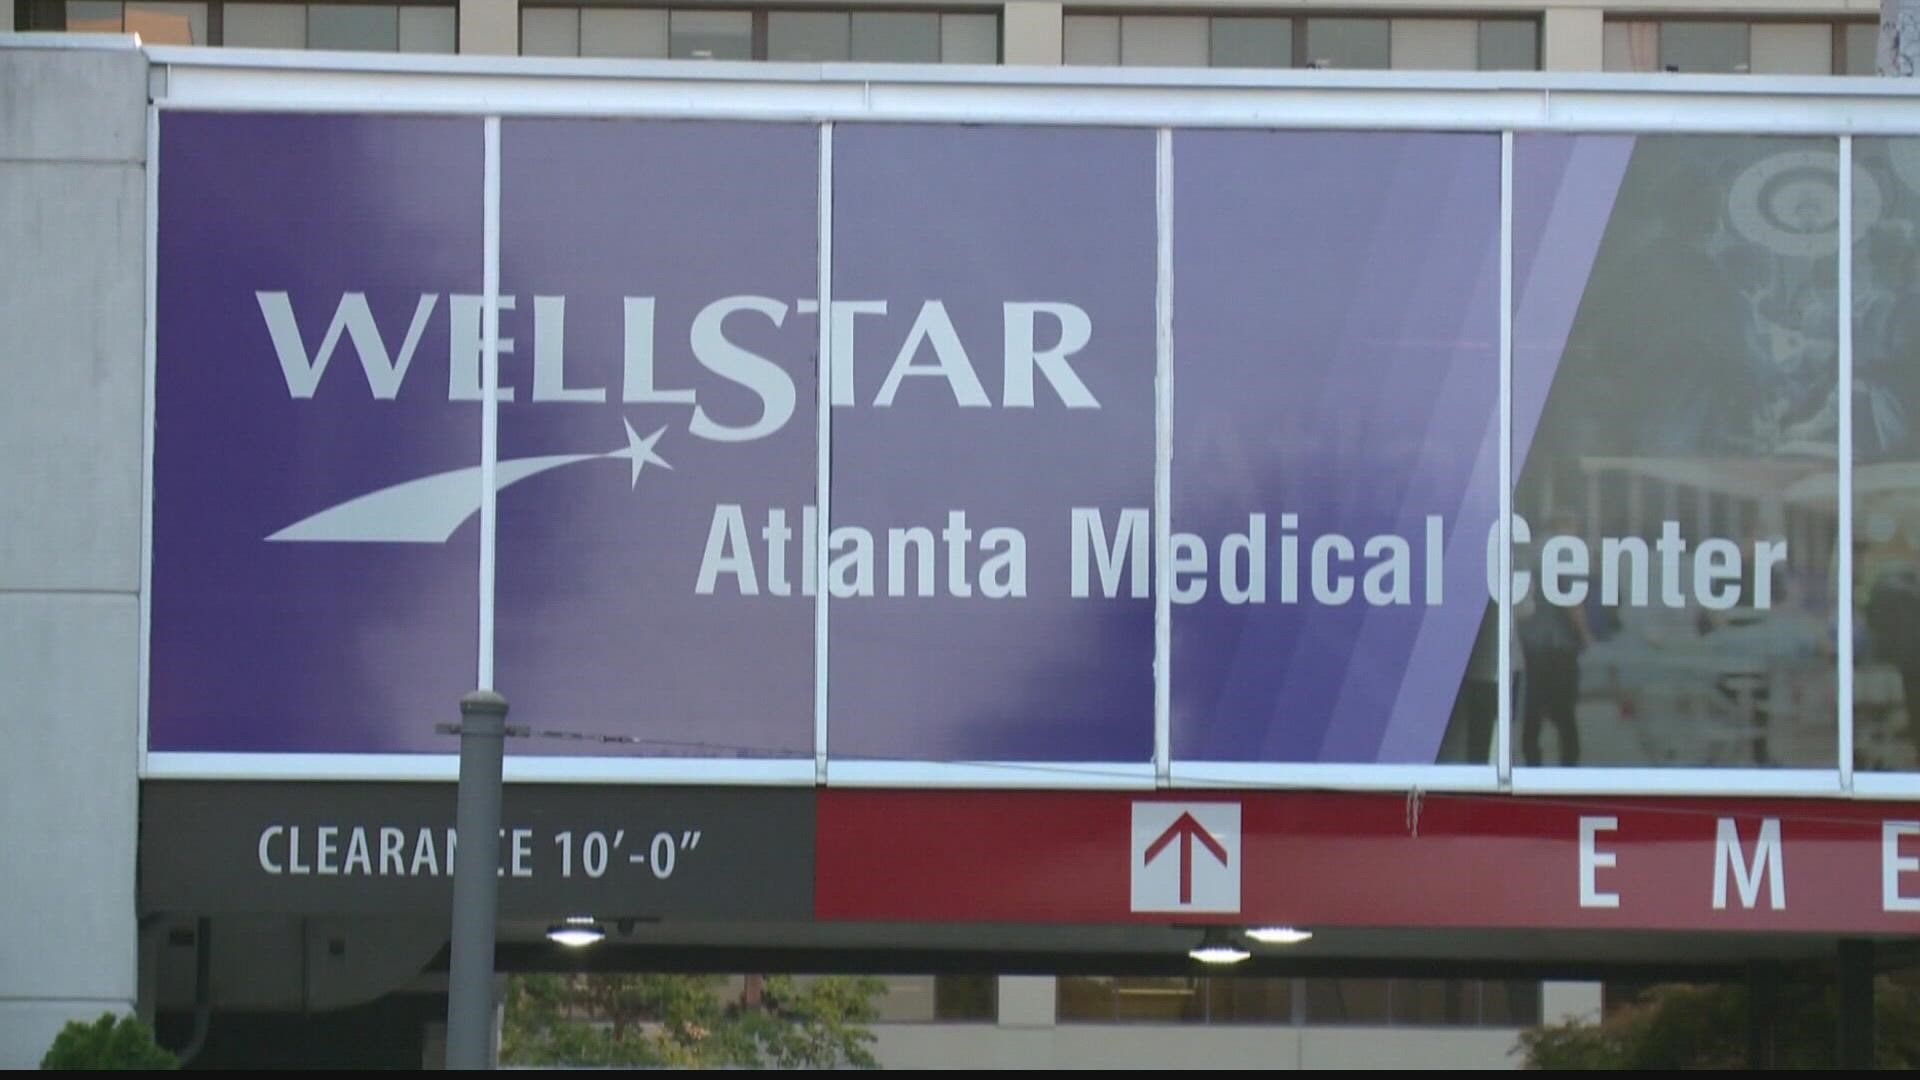 Wellstar said closing the ER early would help reduce the number of patients at the hospital.